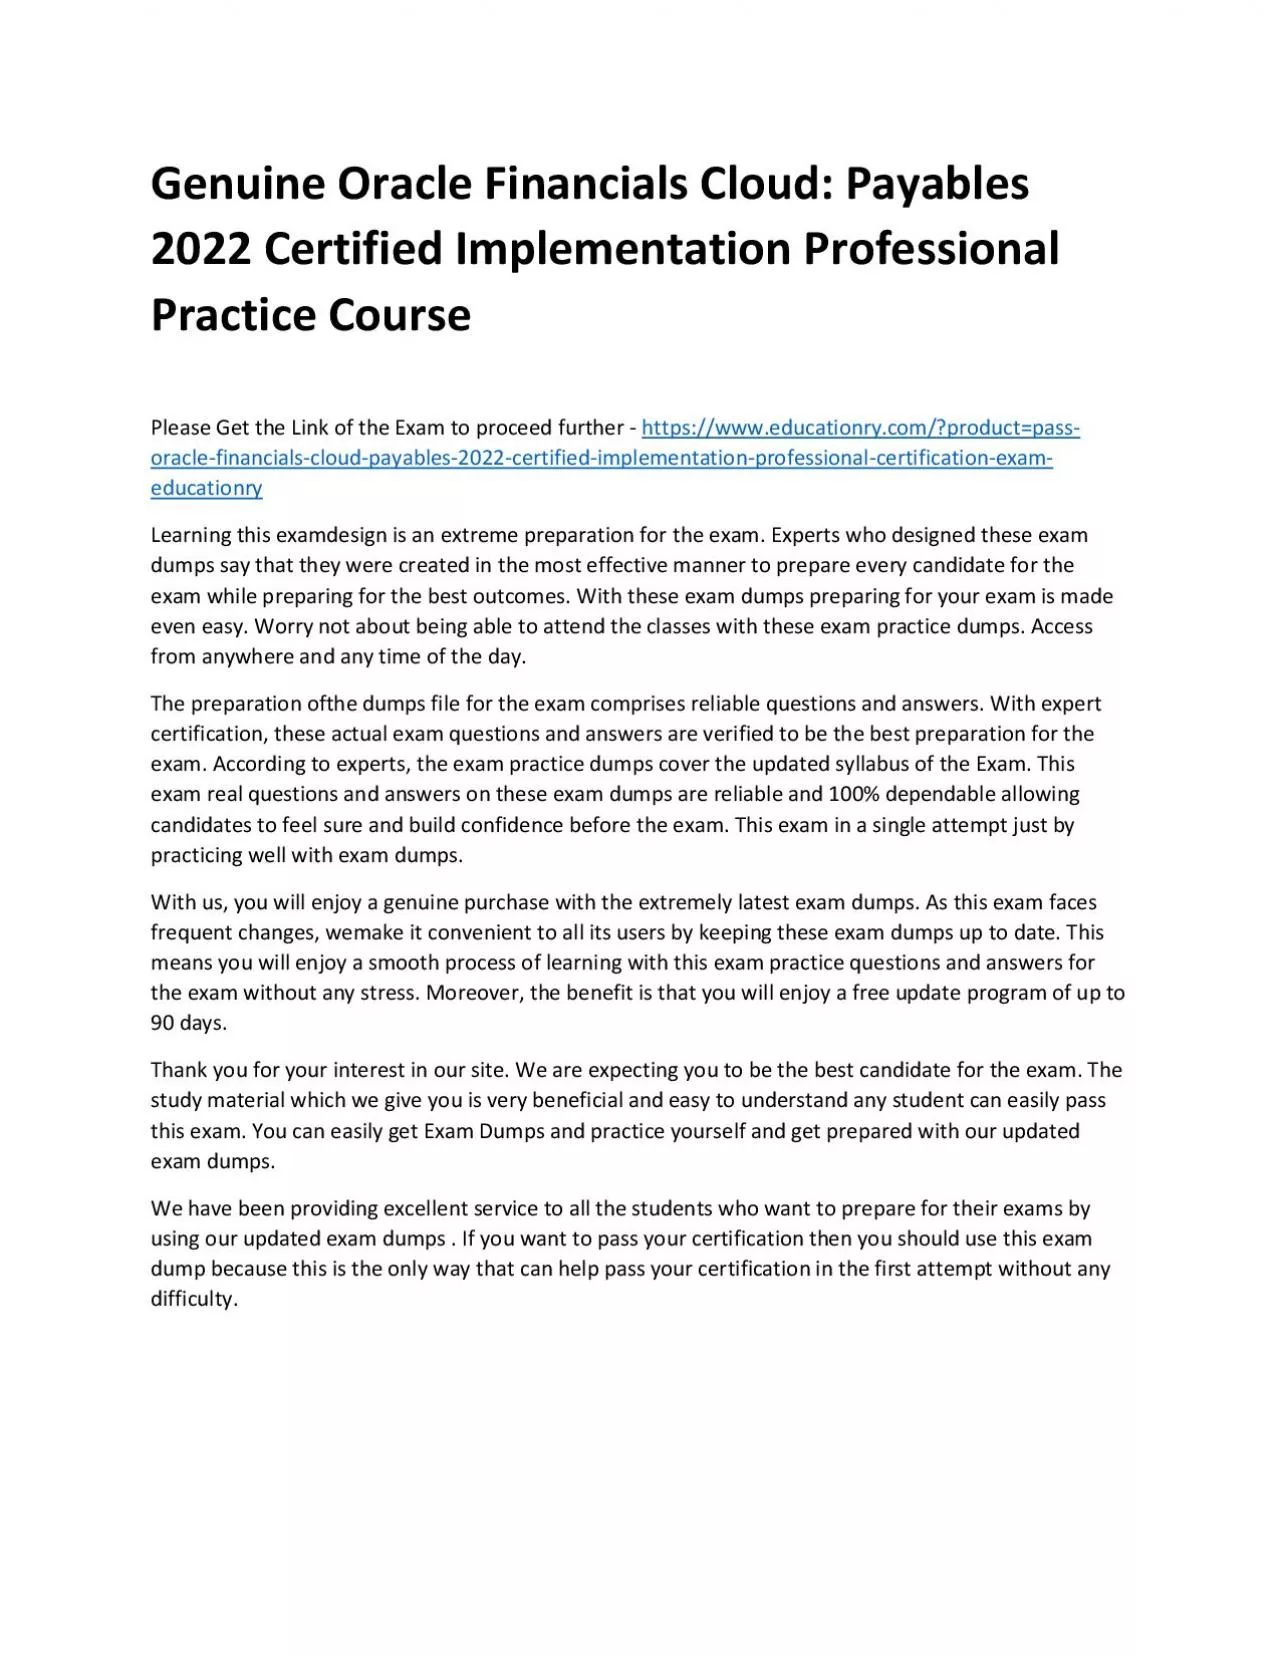 Oracle Financials Cloud: Payables 2022 Certified Implementation Professional